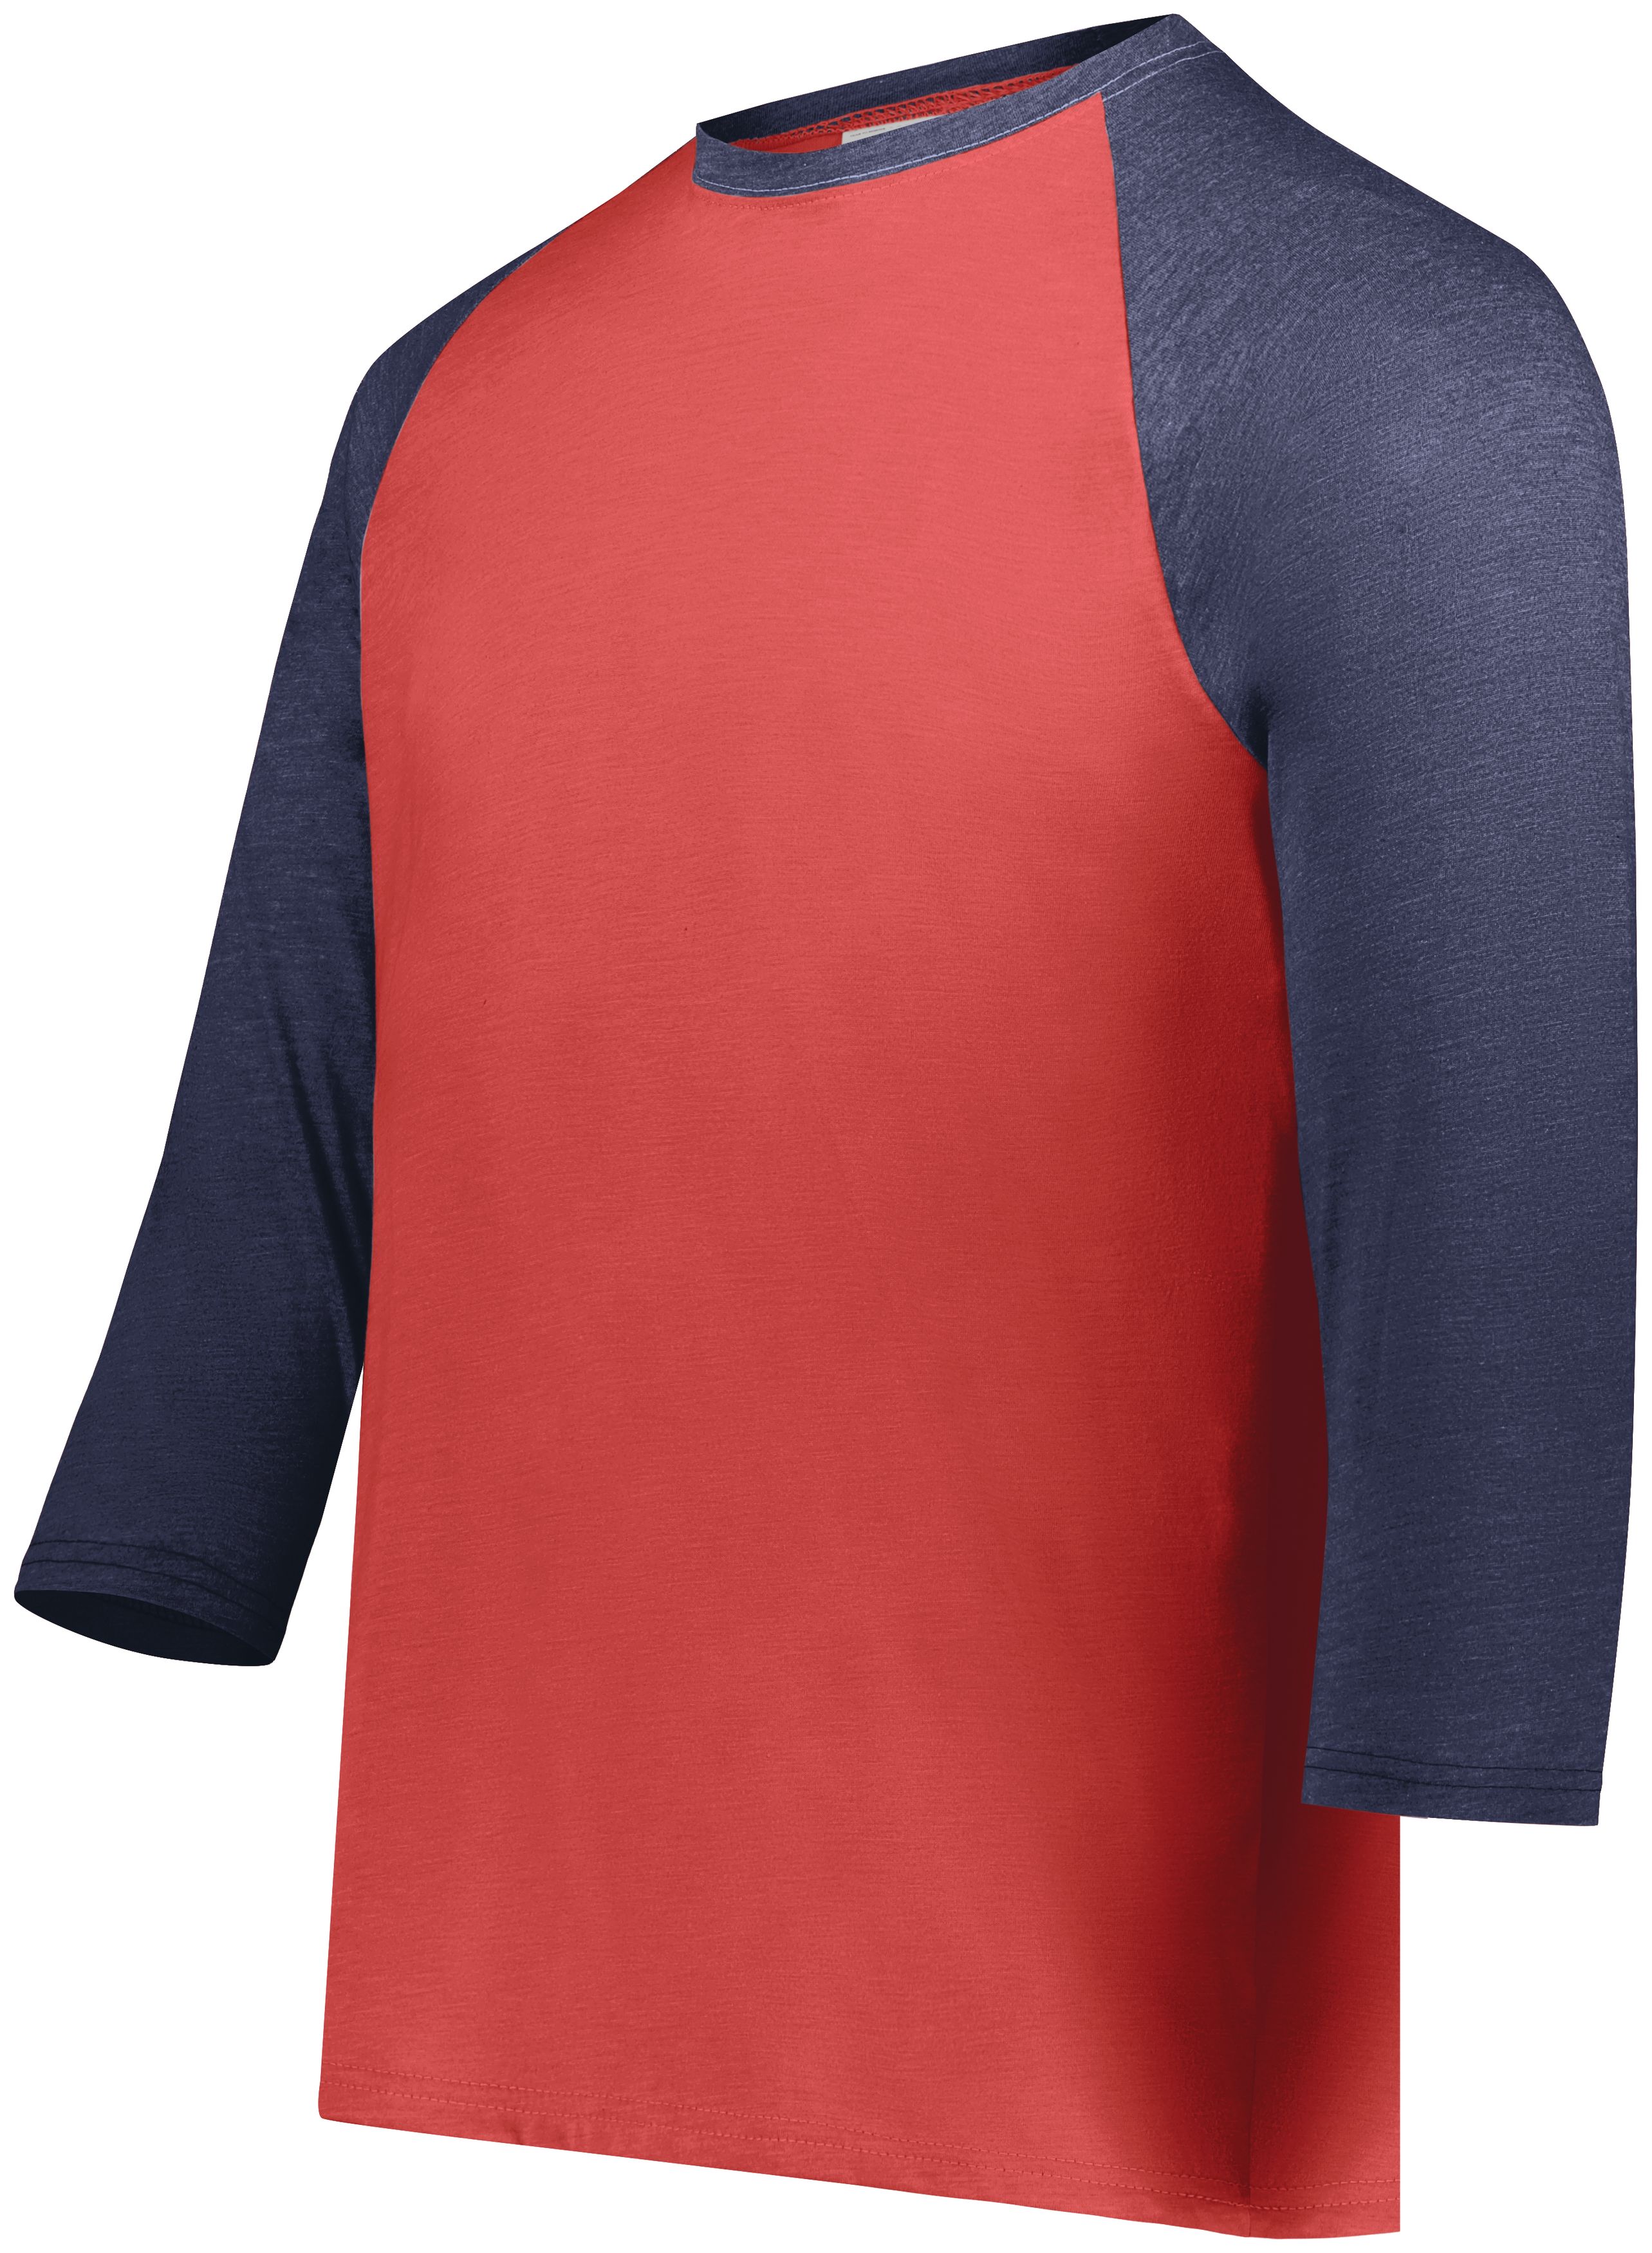 click to view Scarlet Heather/Navy Heather